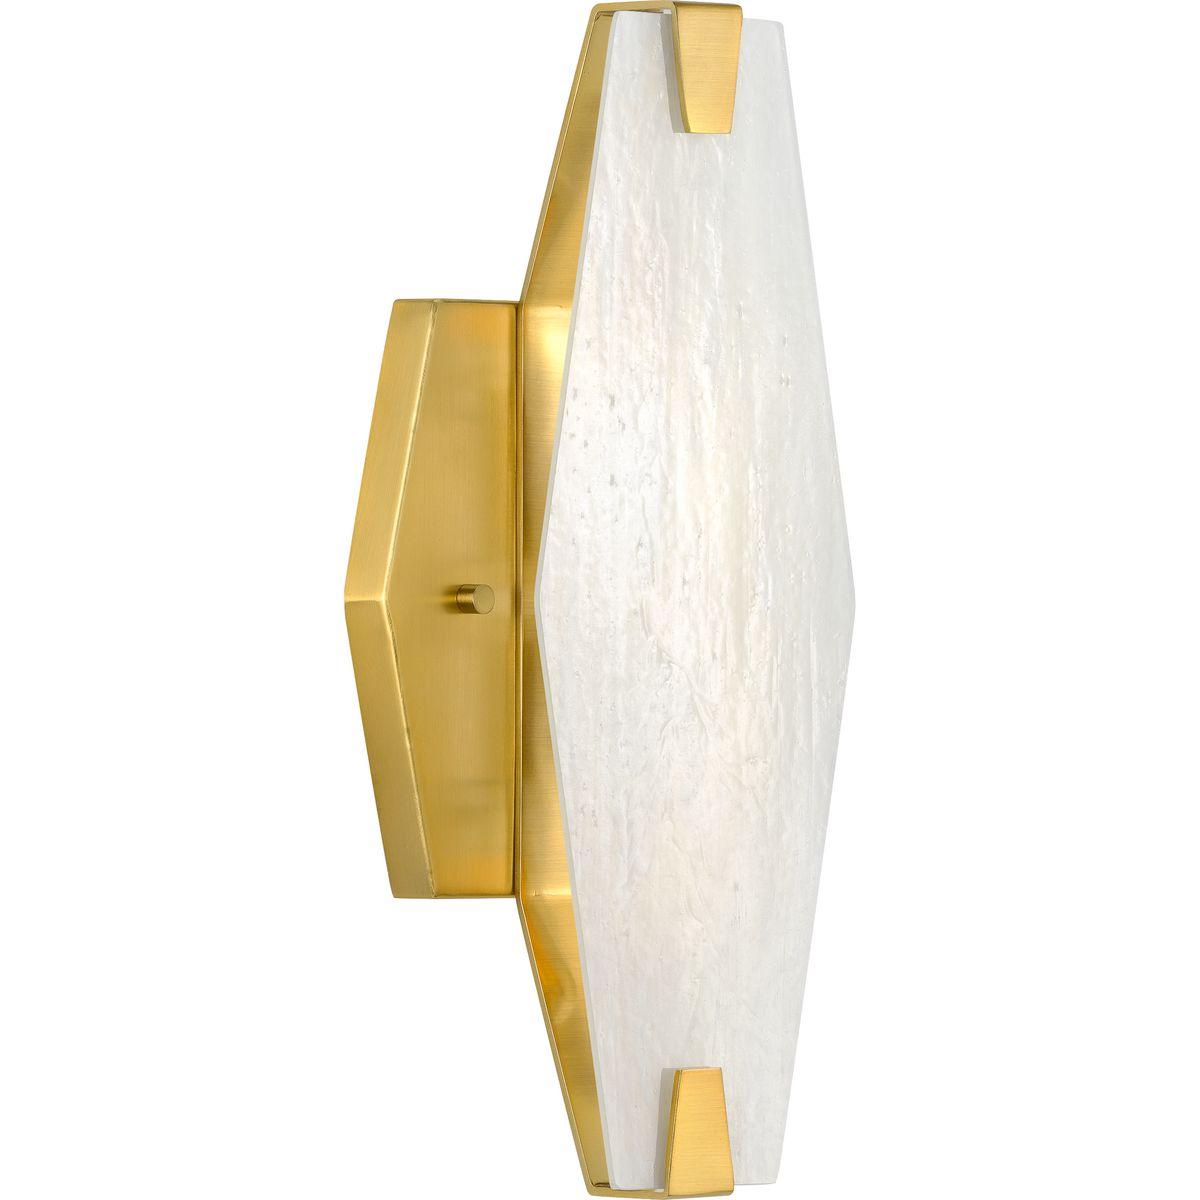 Hubbell P710078-109 Execute bold visions and design statements with the Rae Collection's Two-Light Wall Sconce. A blend of geometric shapes and a sculpted hand artisan frame allows this light fixture to double as a stunning work of art. A glowing golden finish brings this mo